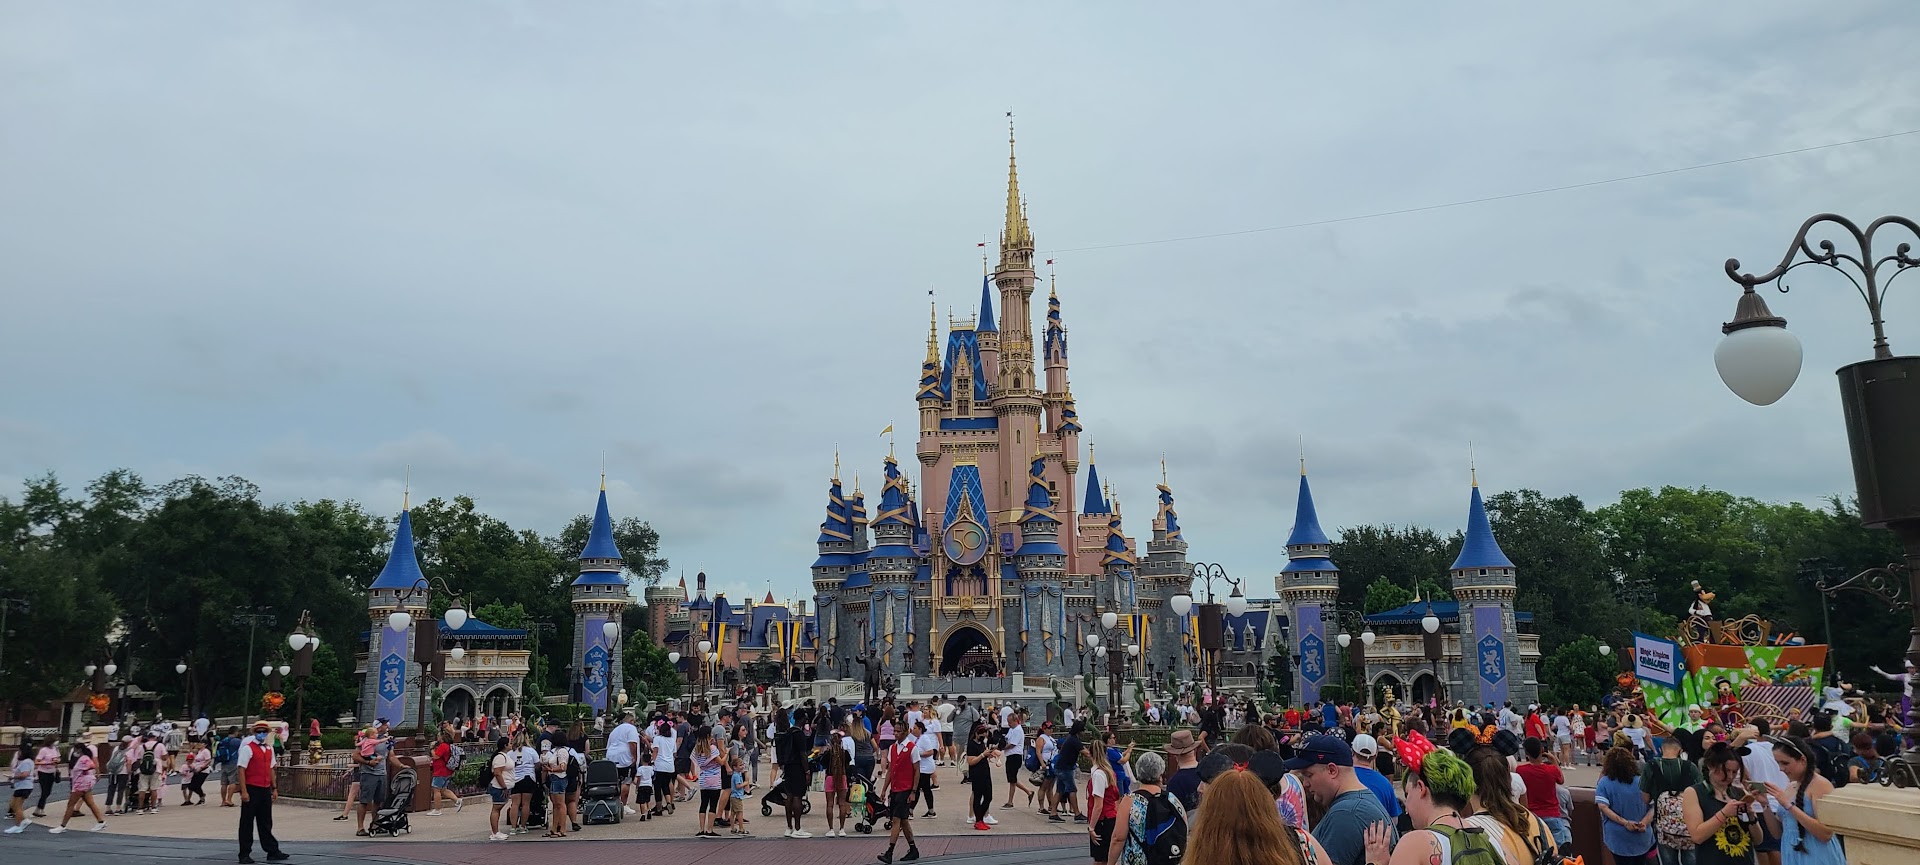 10 Top Secret Disney World Tips (Number 5 Is Awesome!) 35